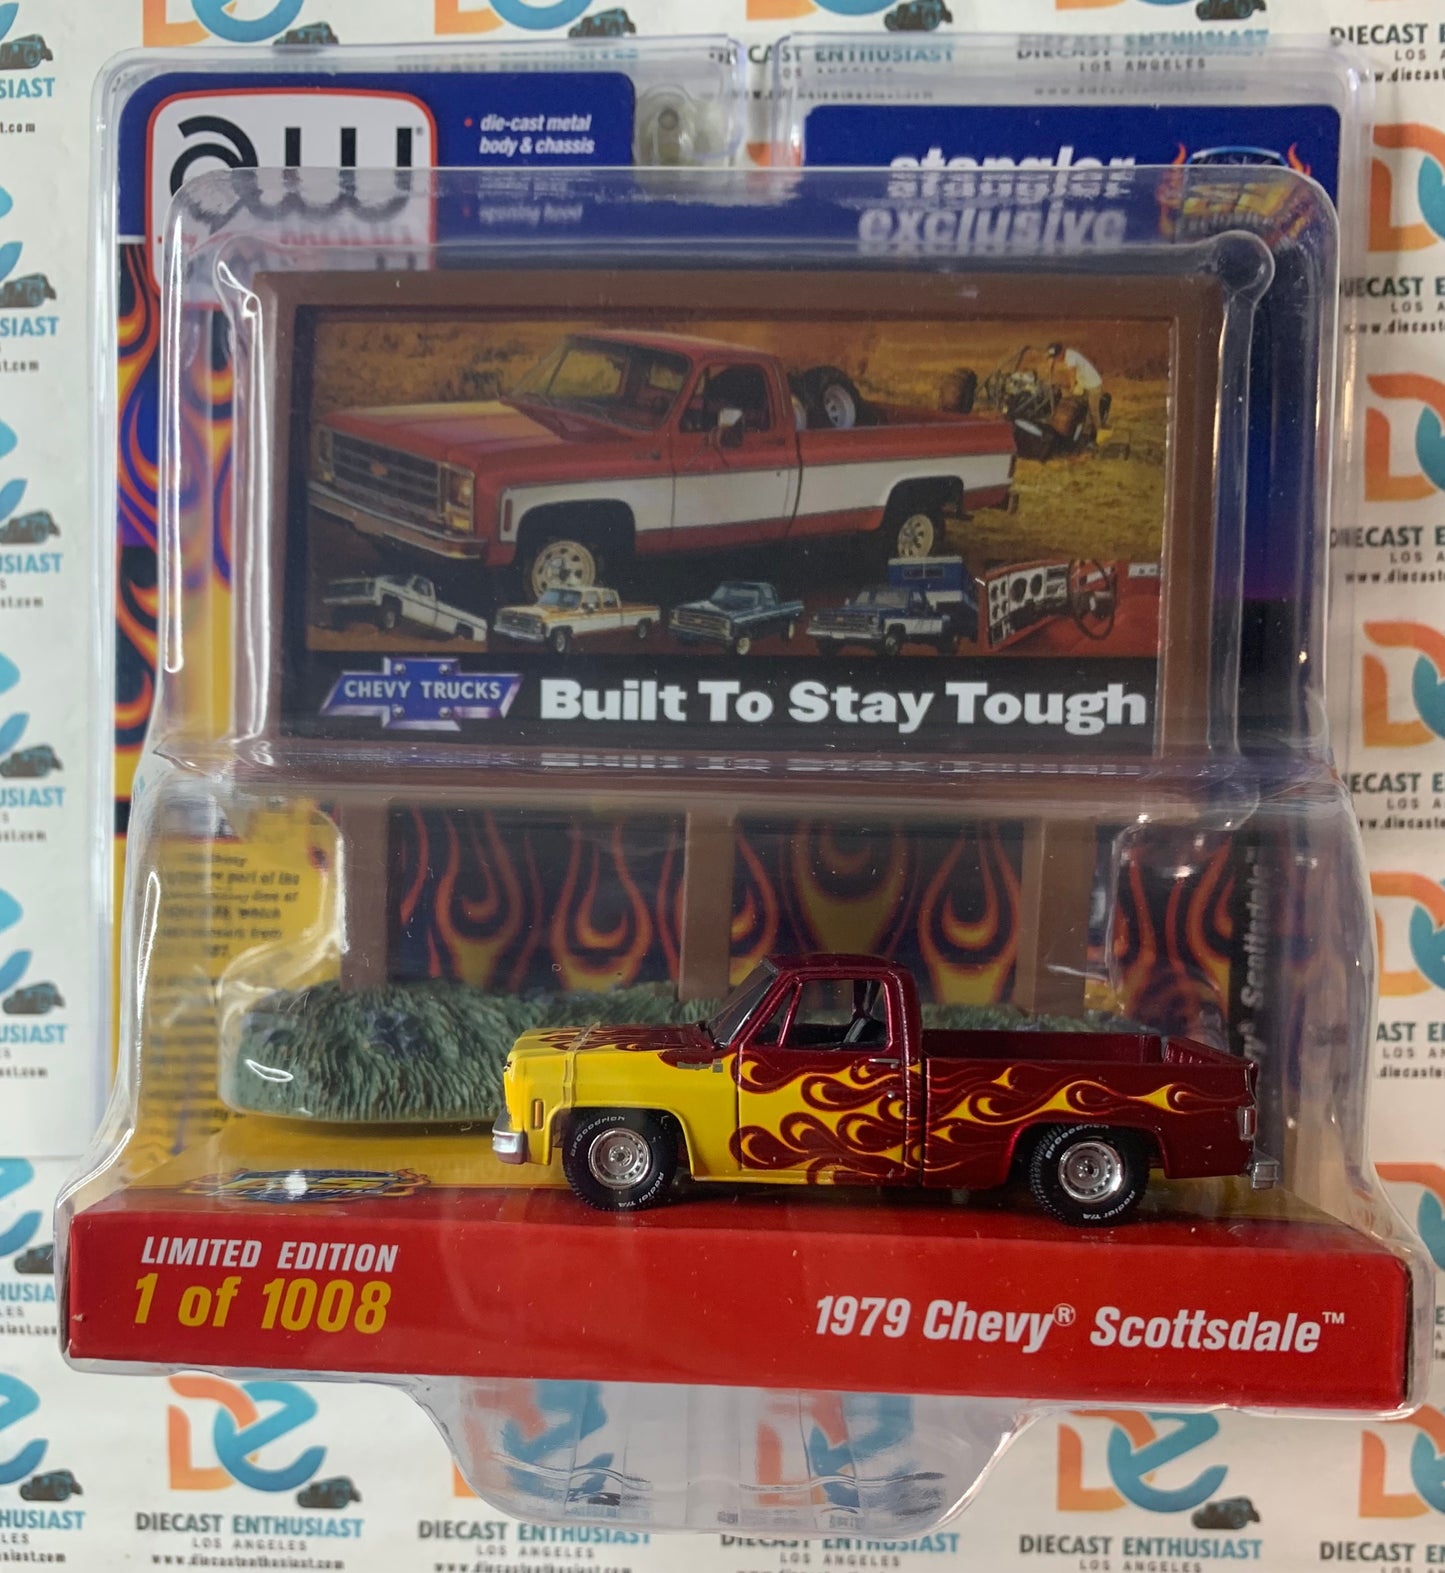 CHASE Auto World CS Customs Exclusives Billboard Diorama 1979 Chevy Scottsdale Blue 1:64